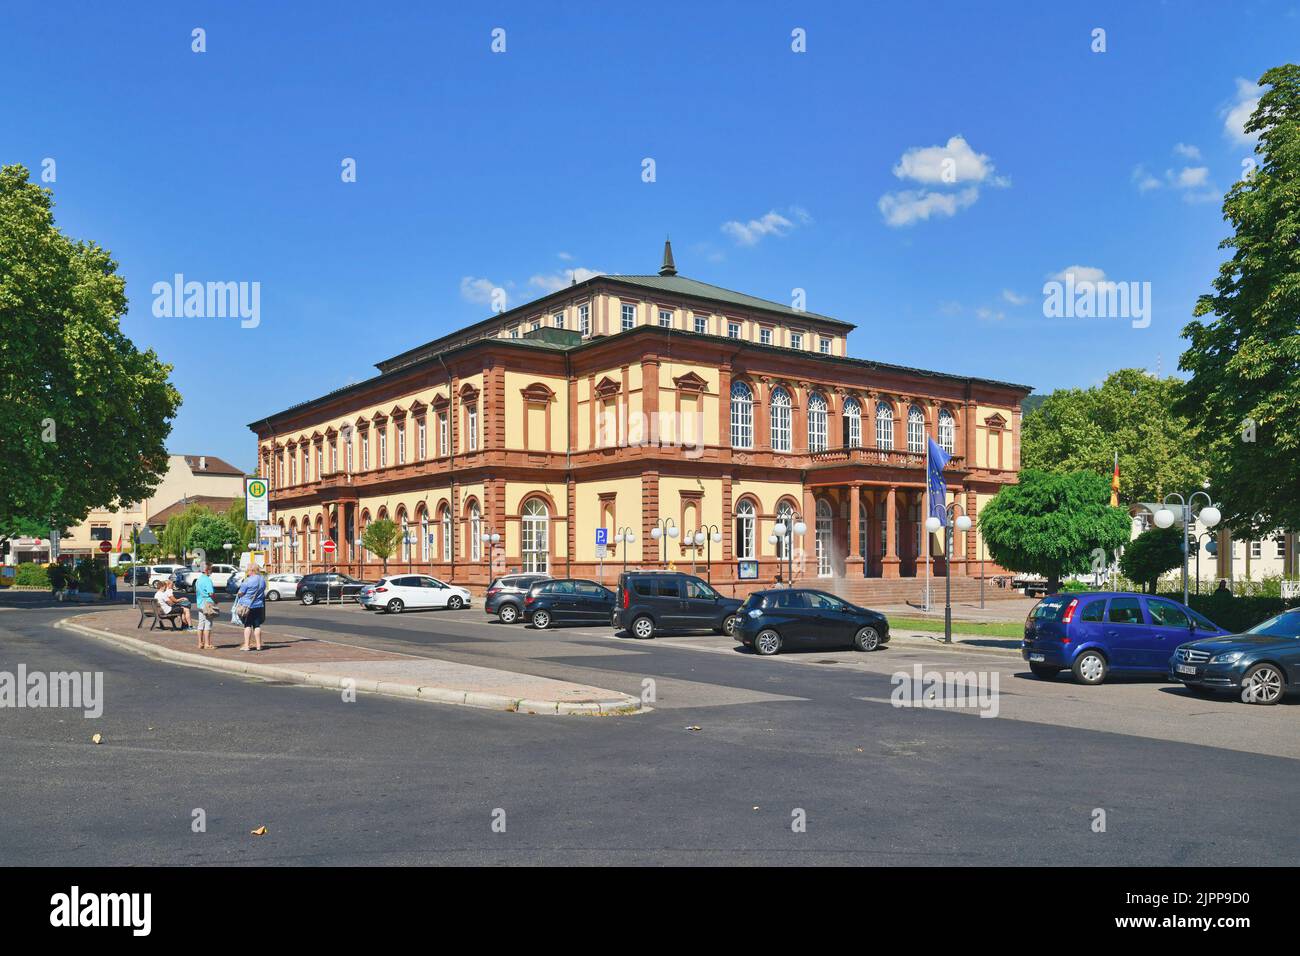 Neustadt an der Weinstrasse, Germany - August 2022: Saalbau, a multifunctional event and congress center used for cultural events Stock Photo